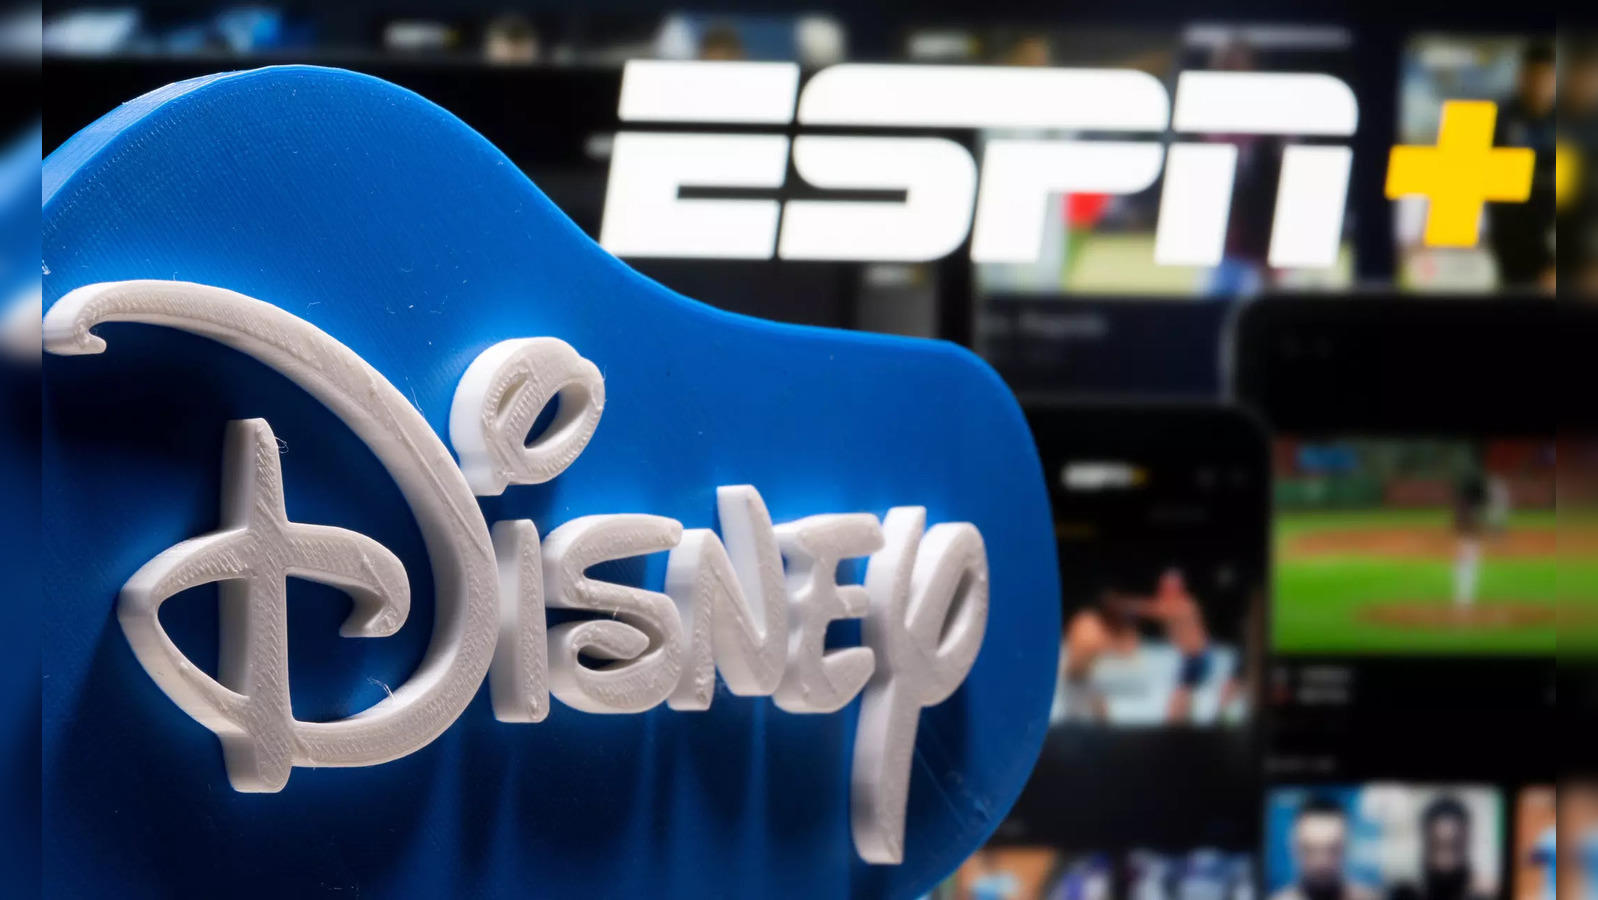 Disney, Fox, Warner Bros Discovery to create joint sports